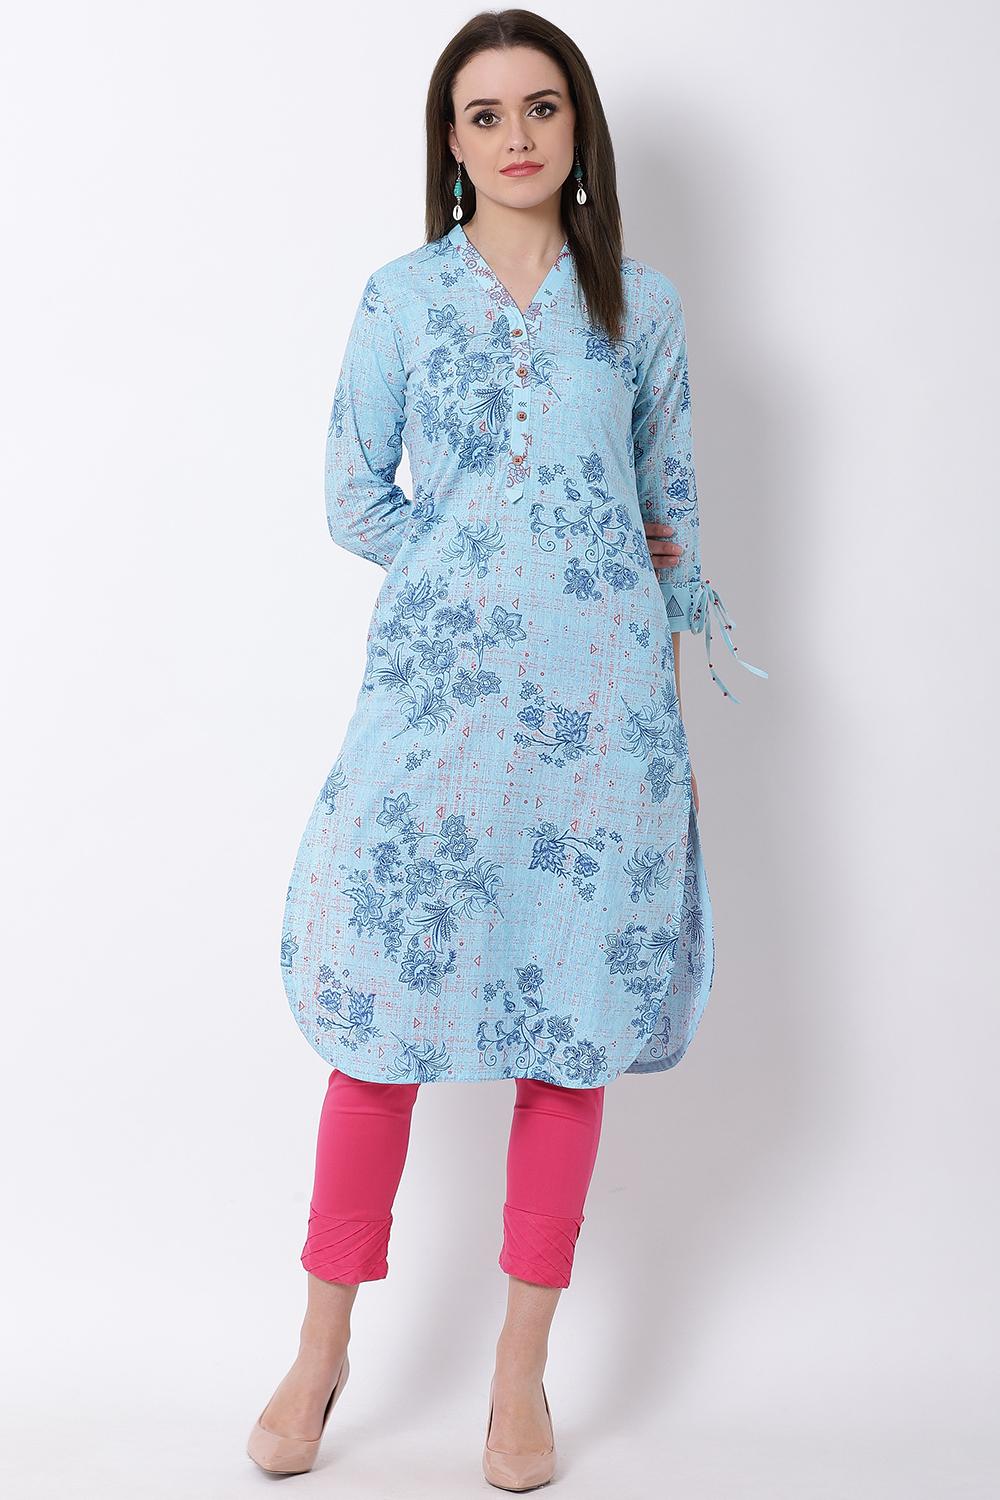 Buy Online Sky Blue Cotton Straight Kurta for Women at Best Price at ...